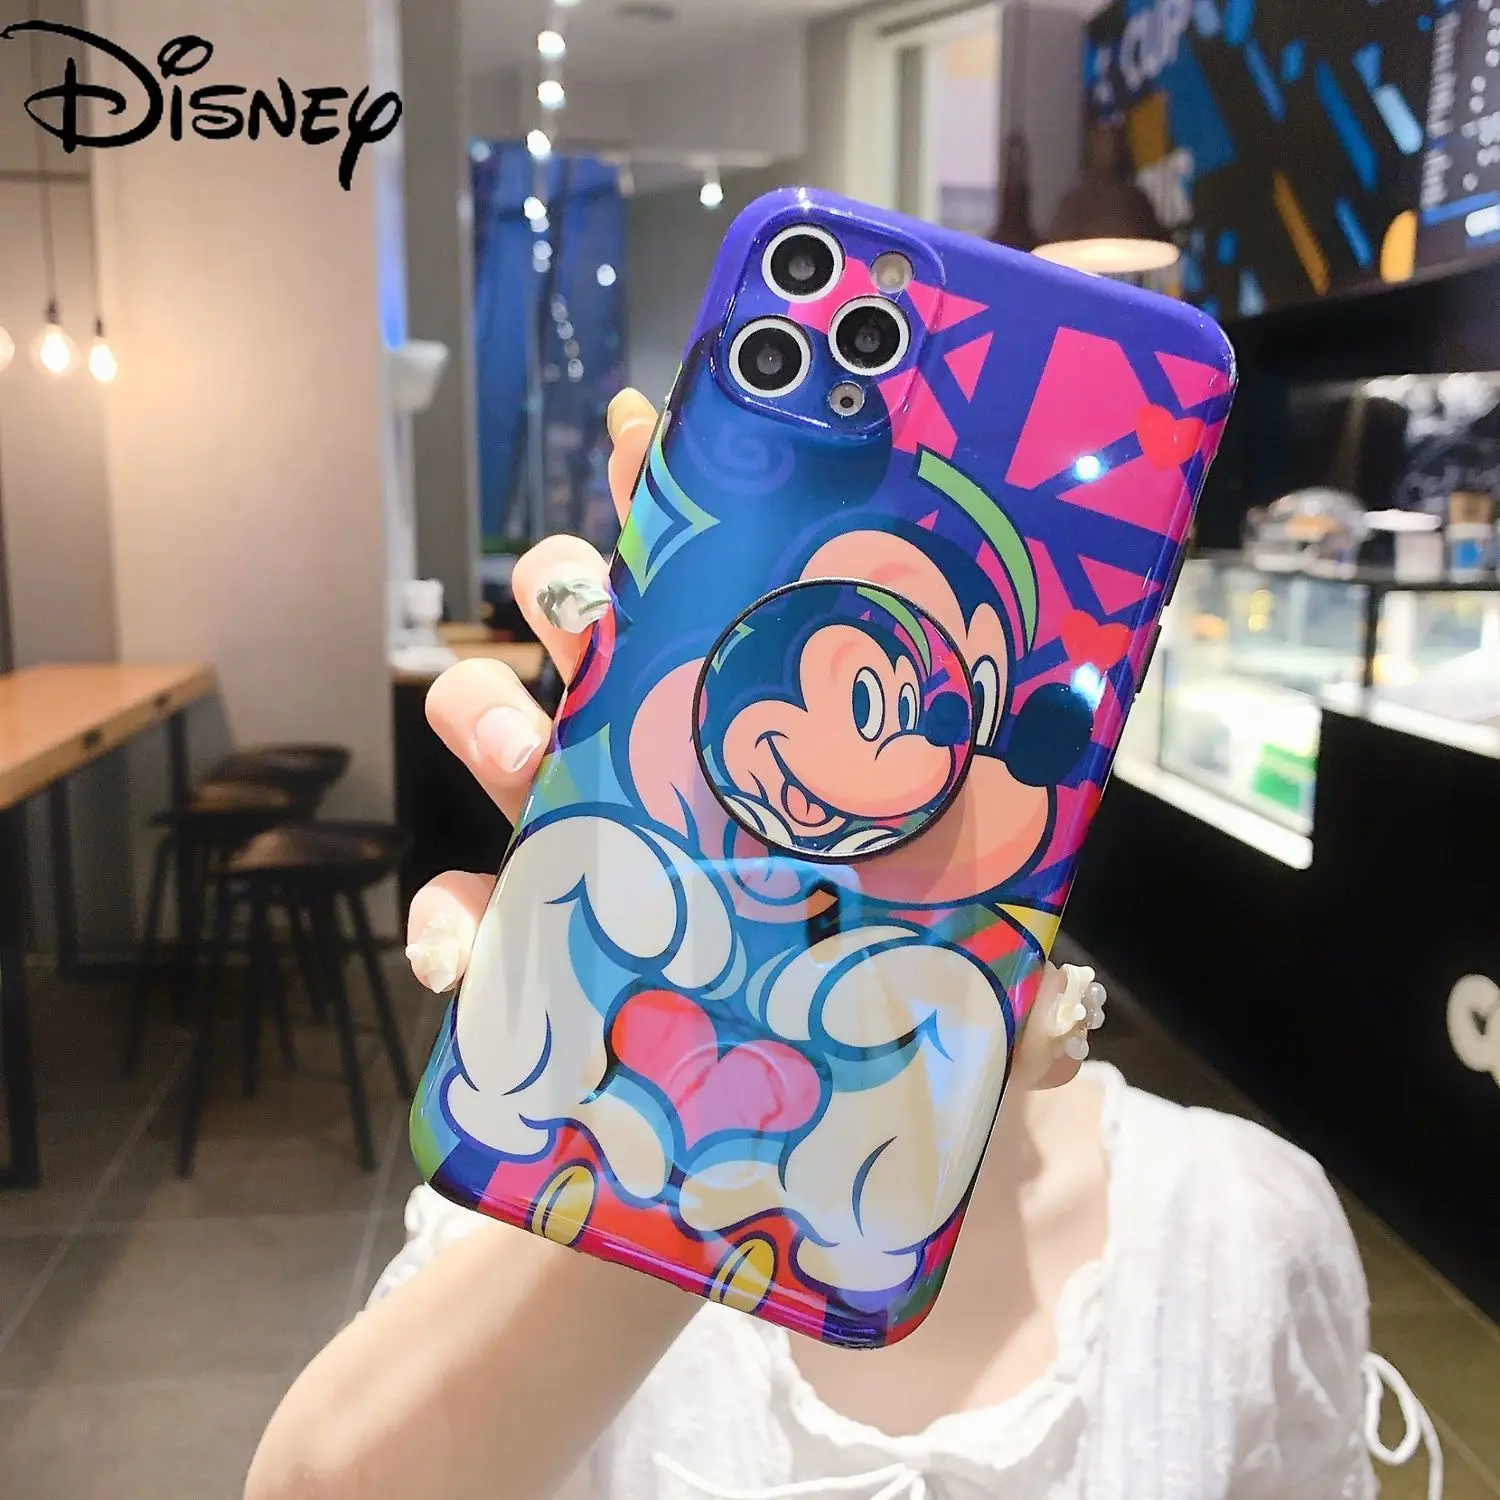 

Disney Mickey Minnie Blu-ray couple mobile phone case with stand for iPhone12mini /12promax/iPhonex/xs xr/7/8plus